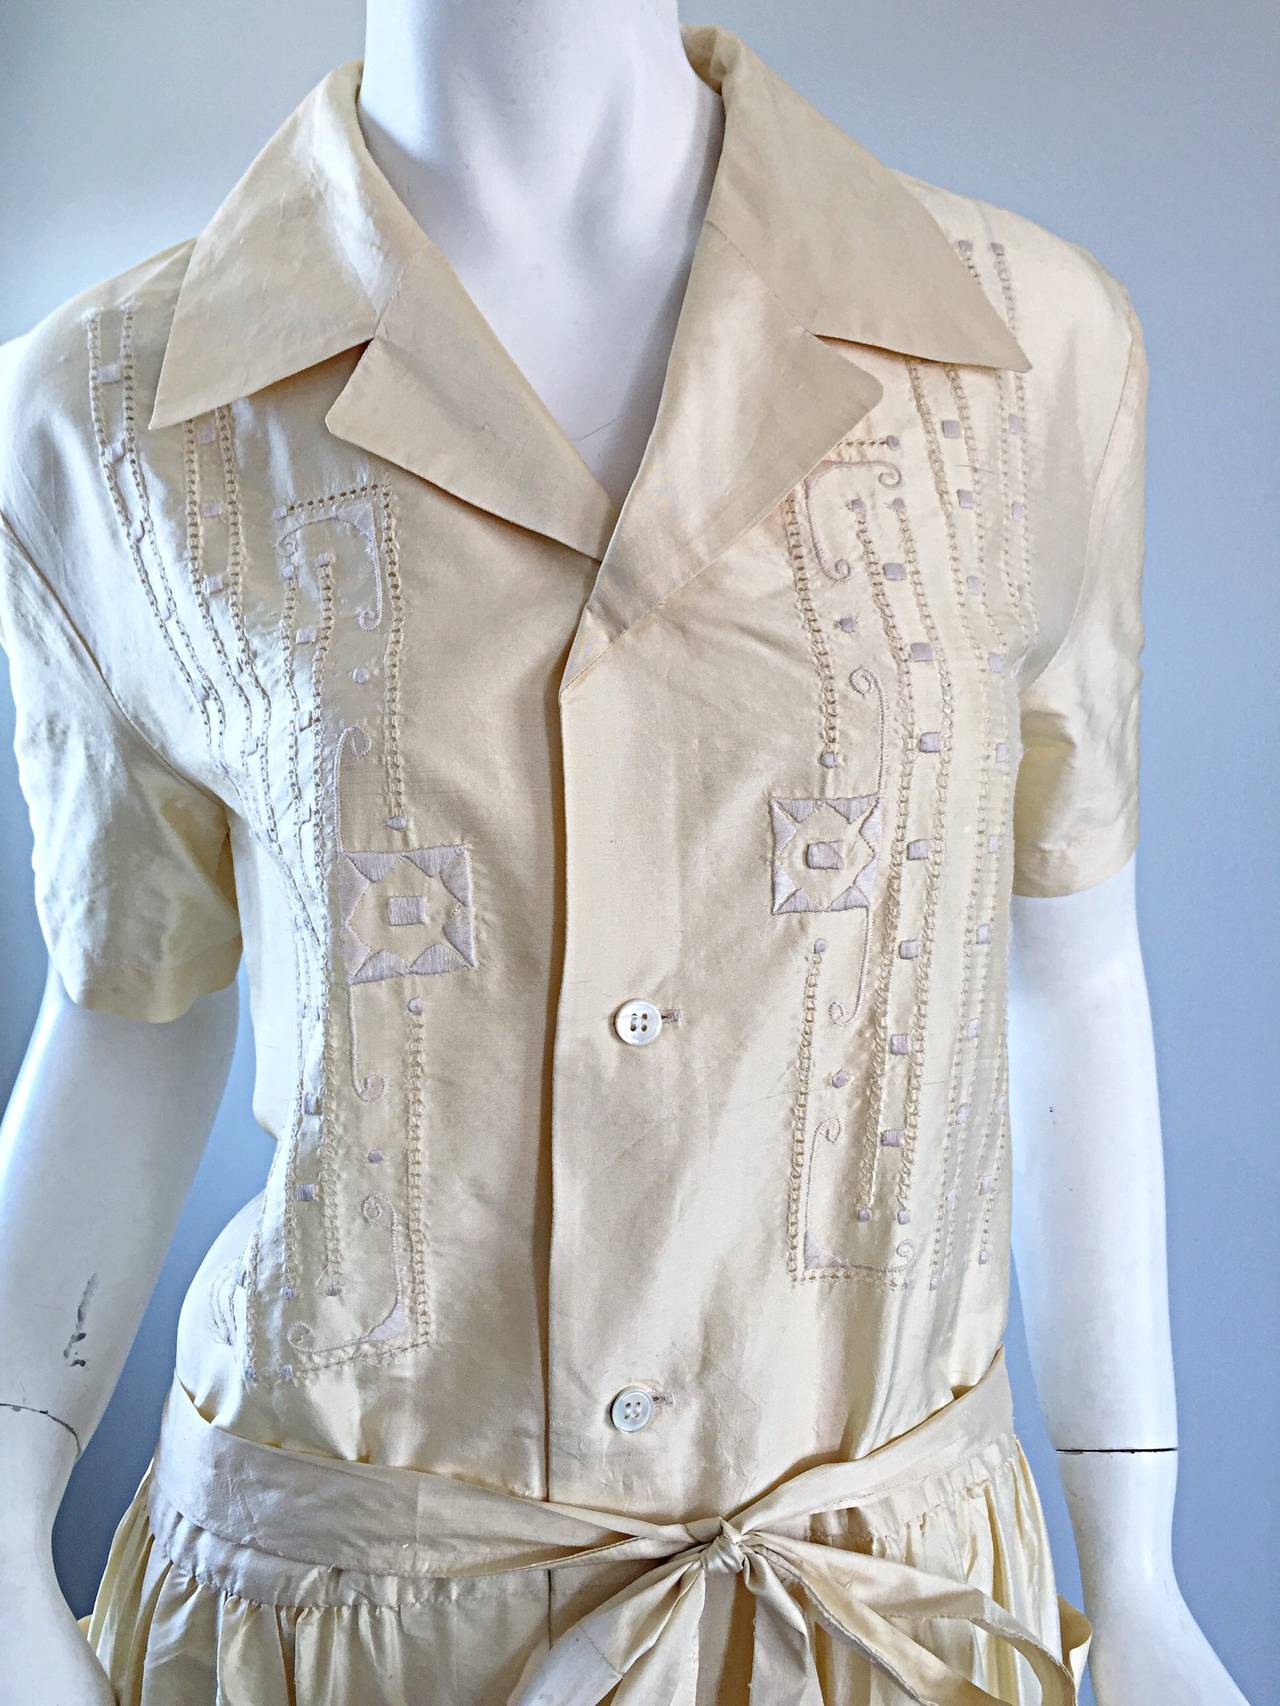 Important and chic vintage early 80s Comme des Garcons musuem worthy Mexican ivory silk shirt dress! Exaggerated collar, with intricate embroidery detail at bust. Pockets at both sides of the full skirt. So much detail with insane intricate design!